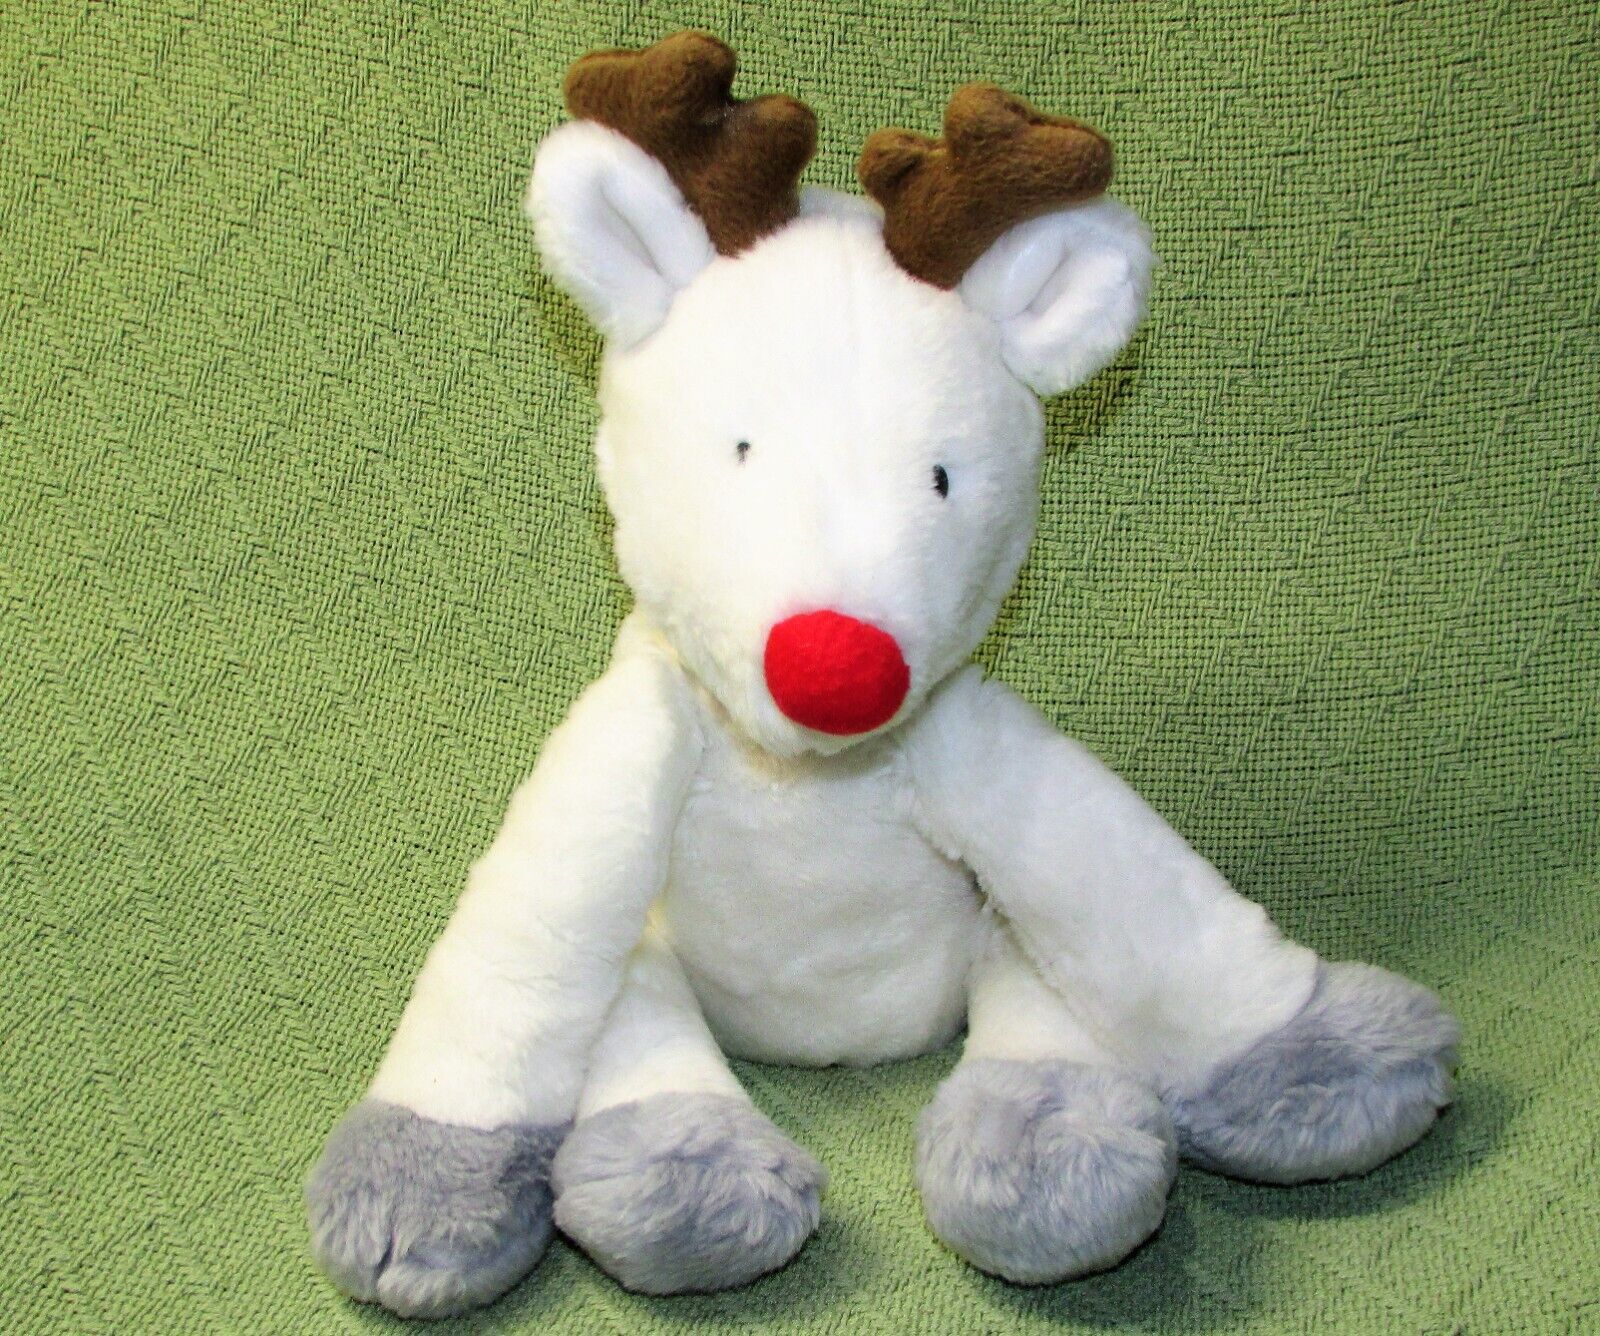 LE TOP PLUSH REINDEER 10" WHITE STUFFED ANIMAL GREEN COLLAR RED NOSE ANTLERS TOY - $22.50